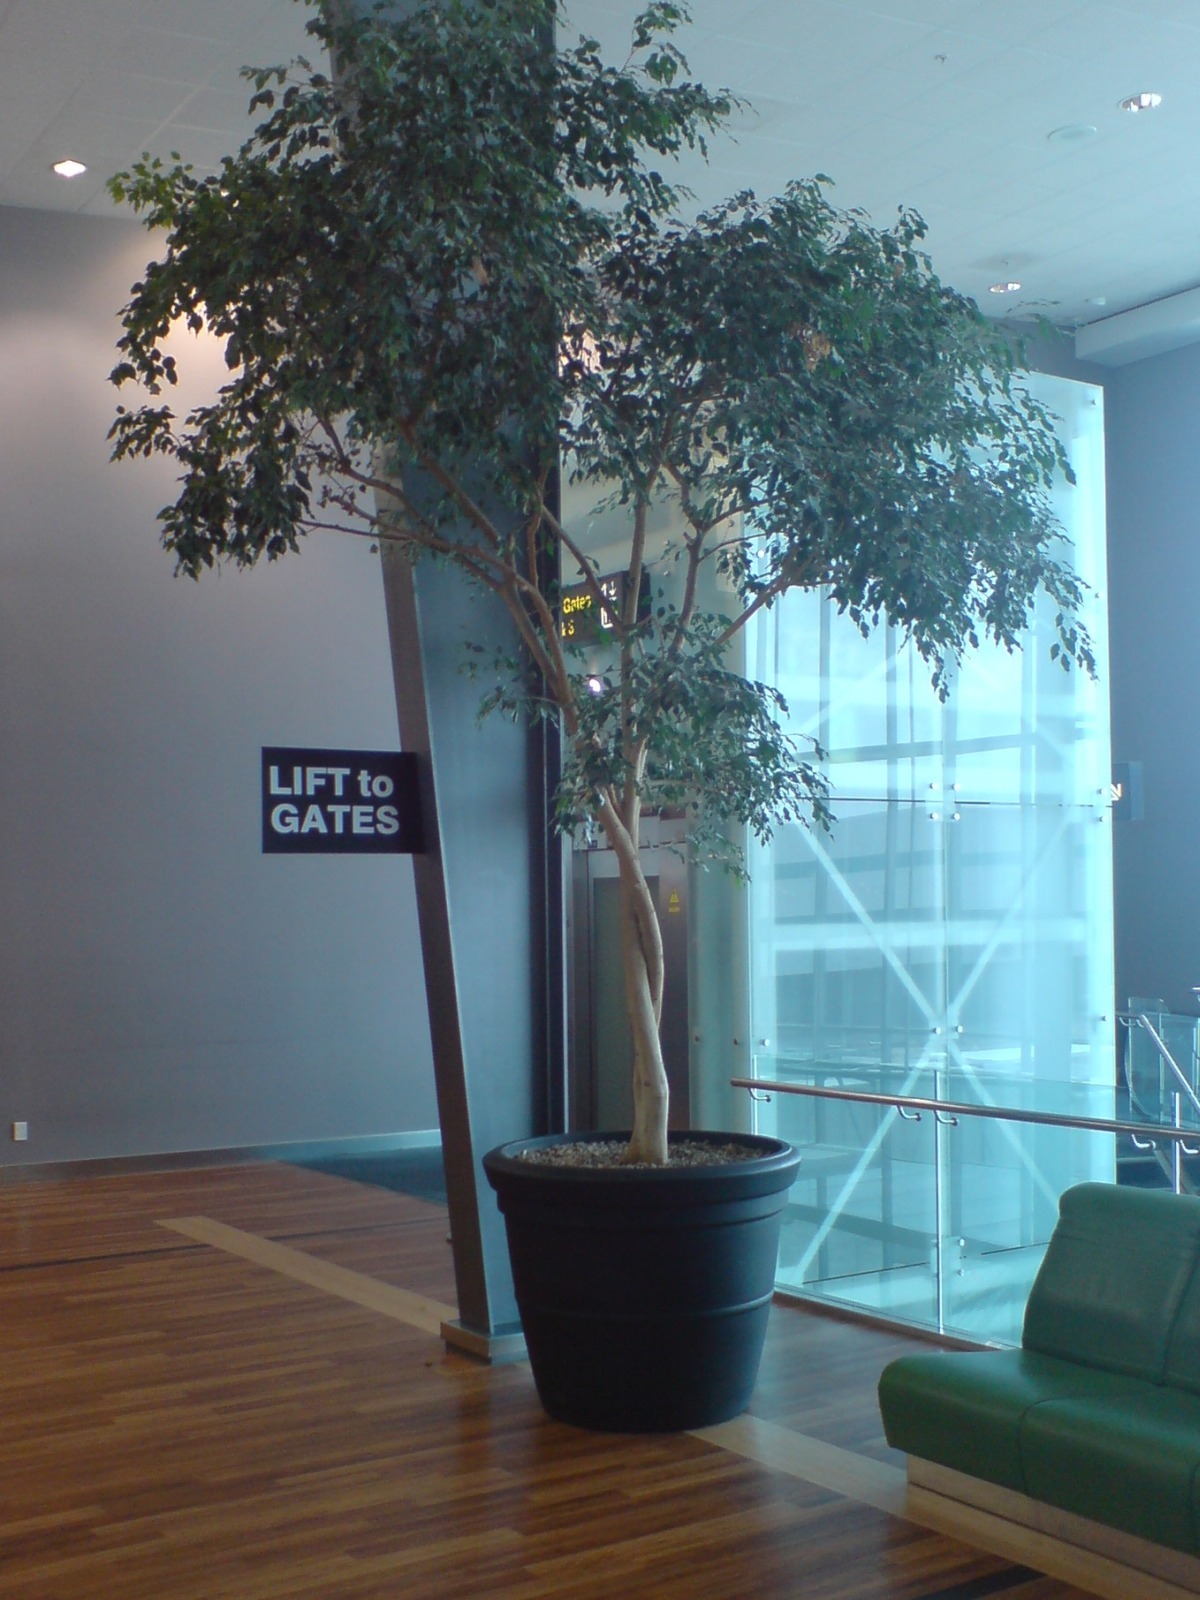 Gigantic_Potted_Tree_Auckland_Airport